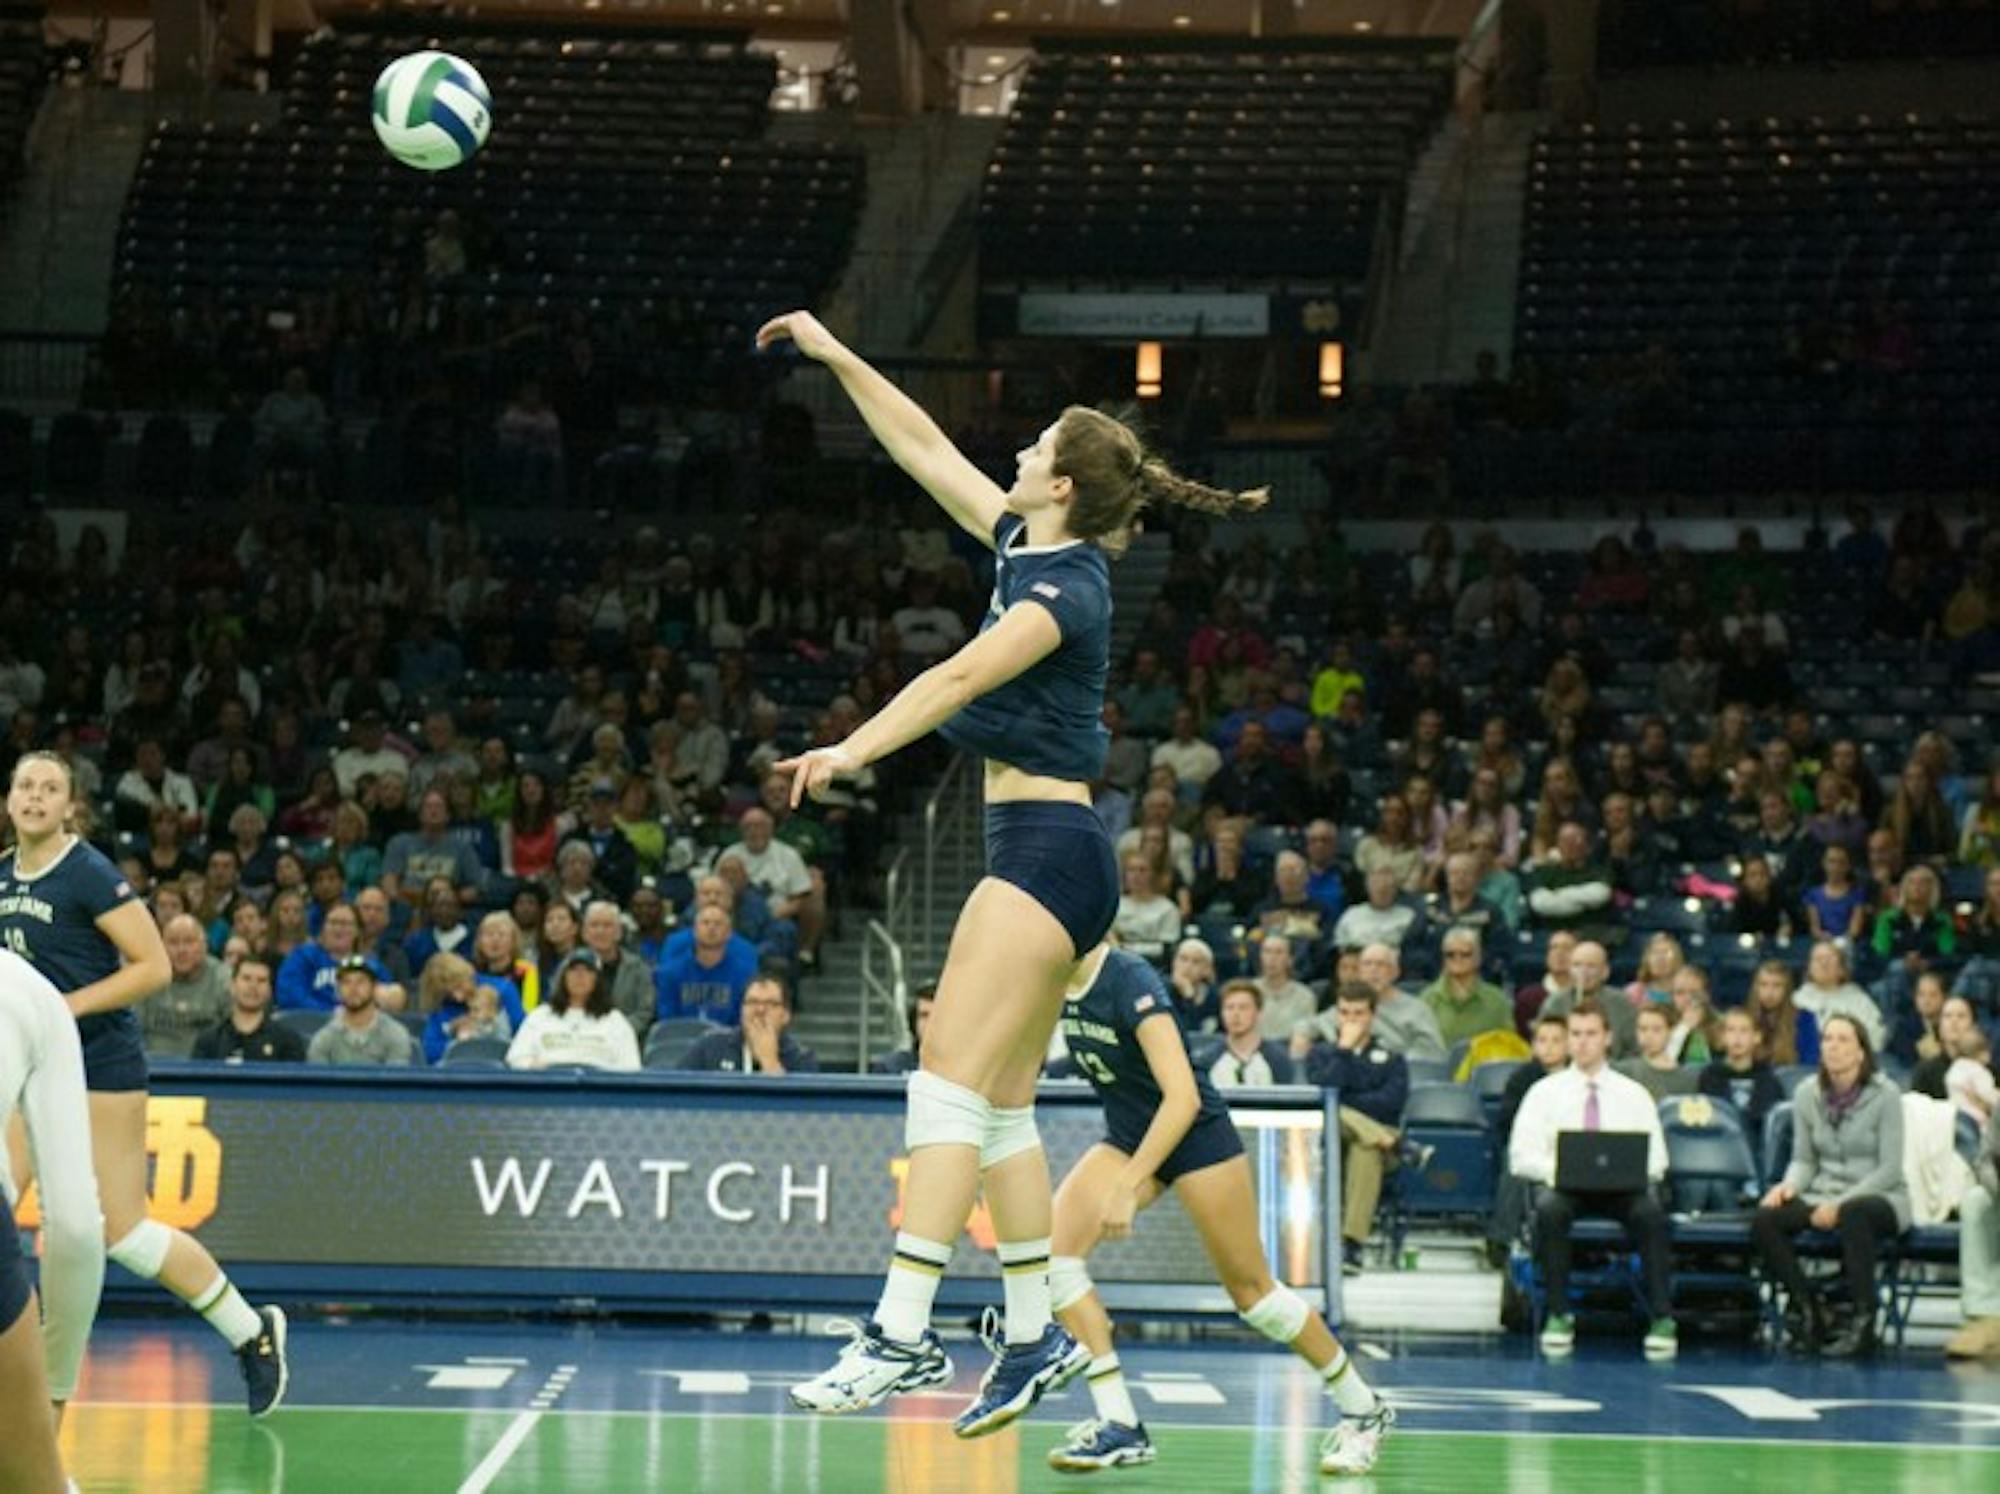 Senior middle blocker Jeni Houser volleys the ball during a 3-1 home loss to Duke on Oct. 5.